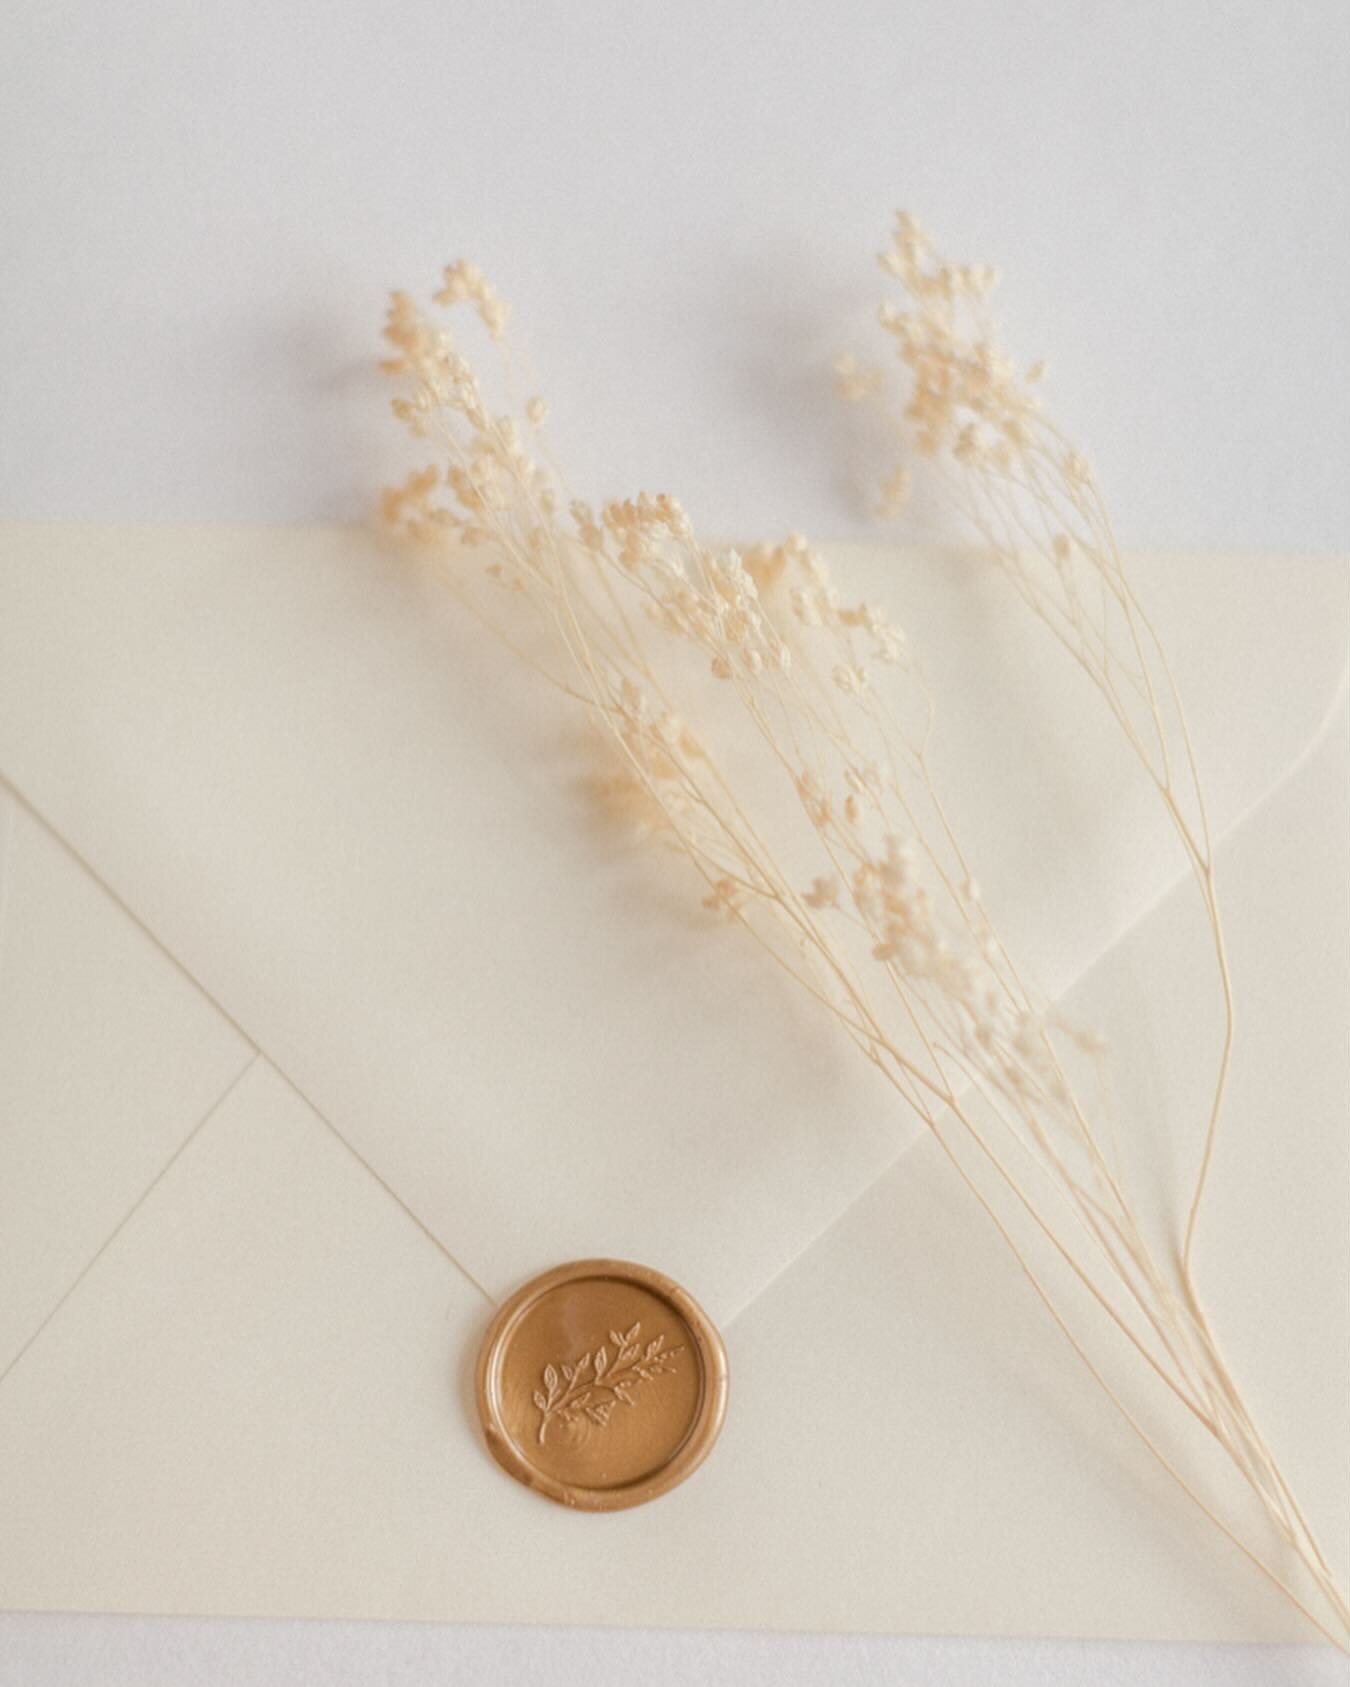 My little branch illustration was turned into a wax seal by @artisaire, and, just to put it out to the universe, I&rsquo;m itching to make some more custom designs this year. 💛

These stationery details are from an editorial shoot with @juno_photogr